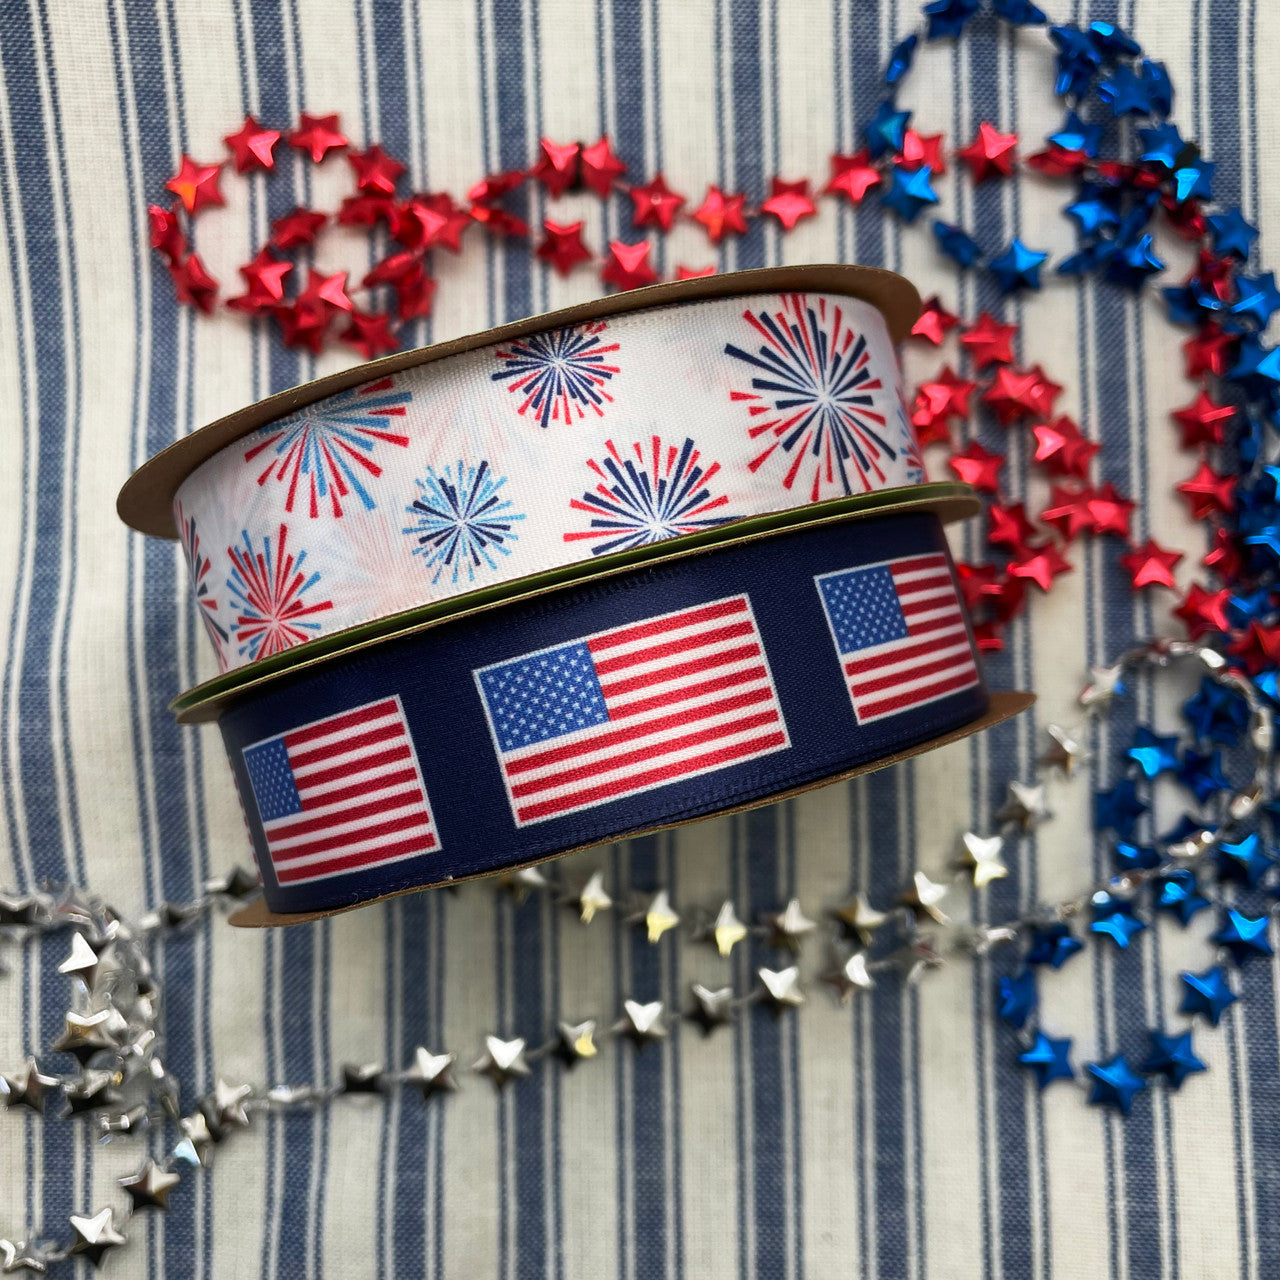 Pair our fireworks ribbon with our flag ribbon for the best 4th of July party decor ever!